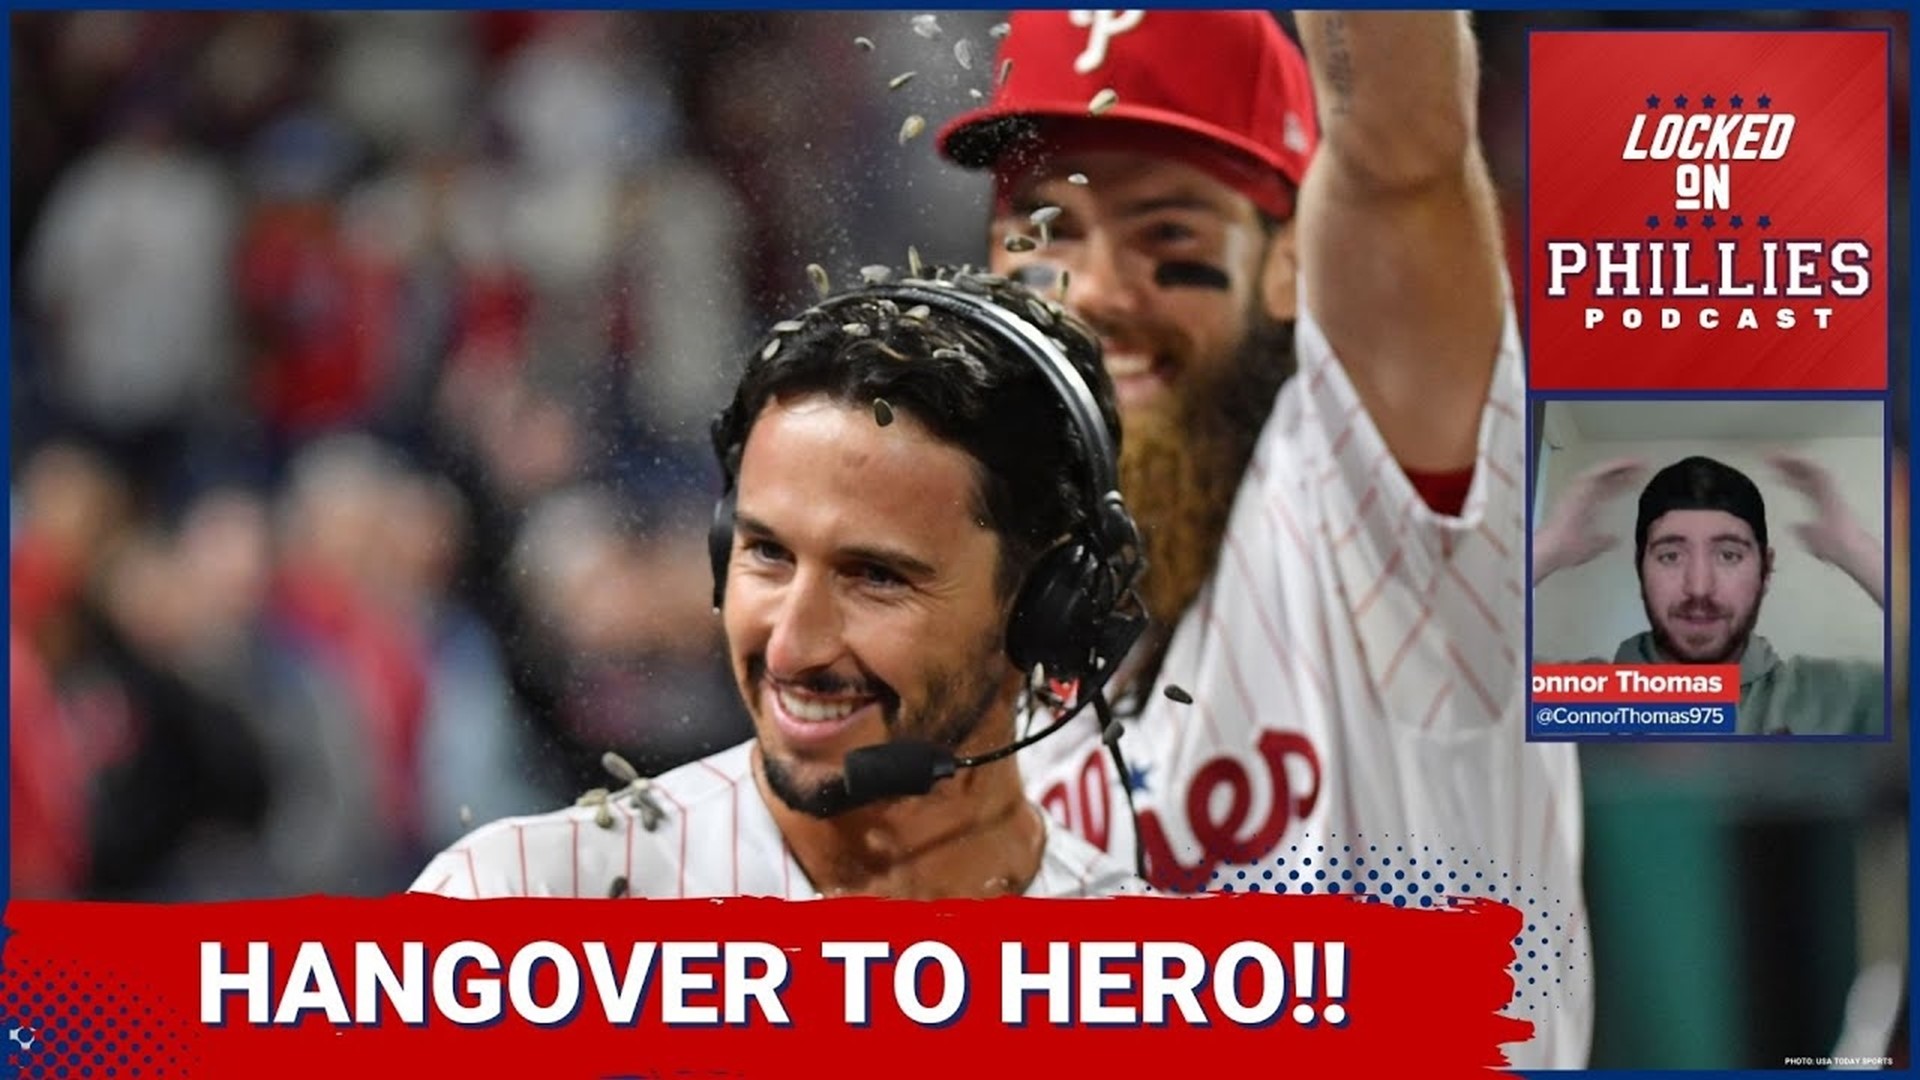 In today's episode, Connor reacts to the Philadelphia Phillies winning their most hungover game of the year, taking down the Pittsburgh Pirates 7-6.